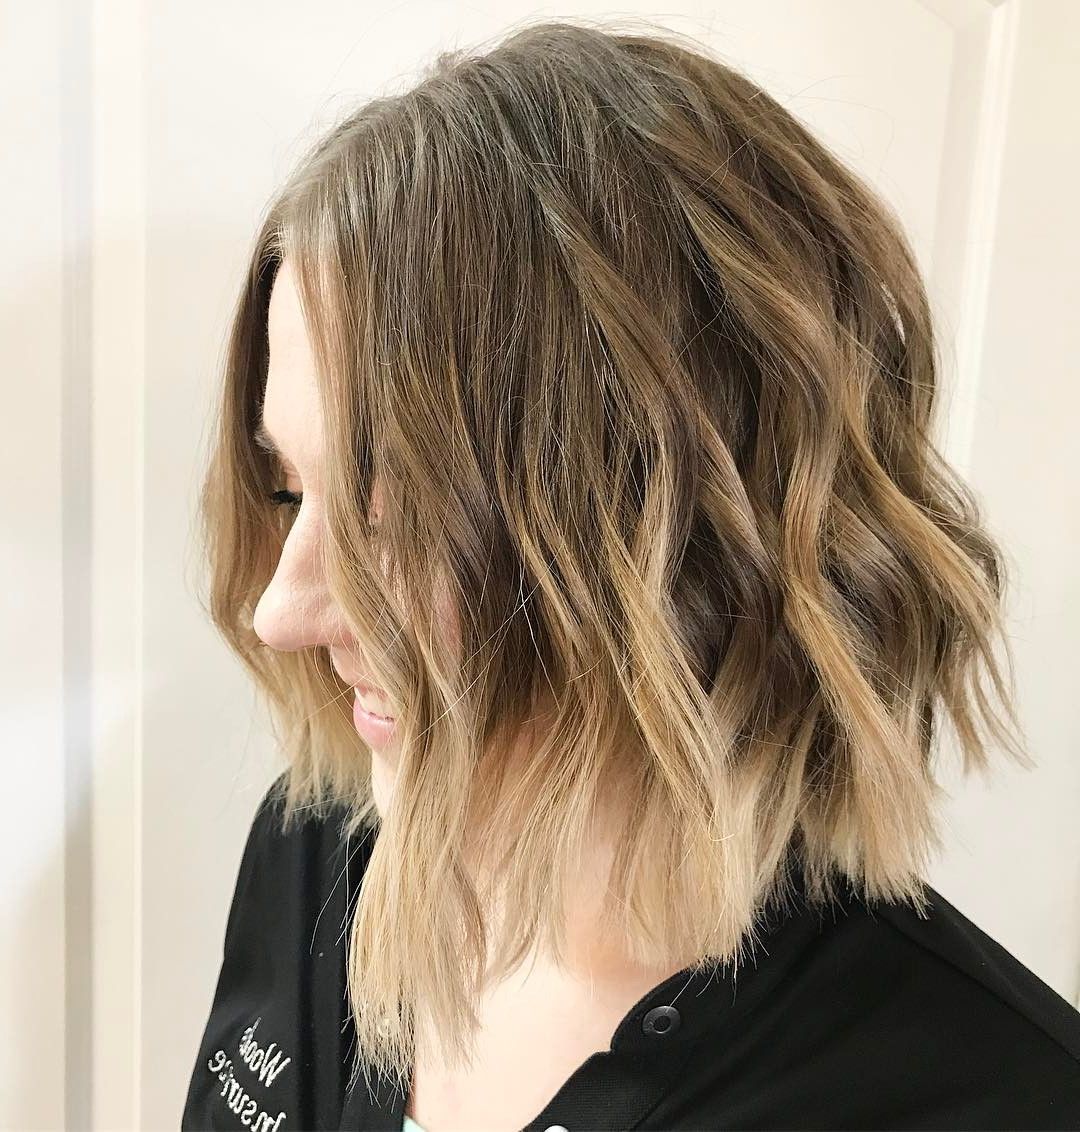 10 Beautiful Medium Bob Haircuts &edgy Looks: Shoulder Length Intended For Nape Length Blonde Curly Bob Hairstyles (View 5 of 25)